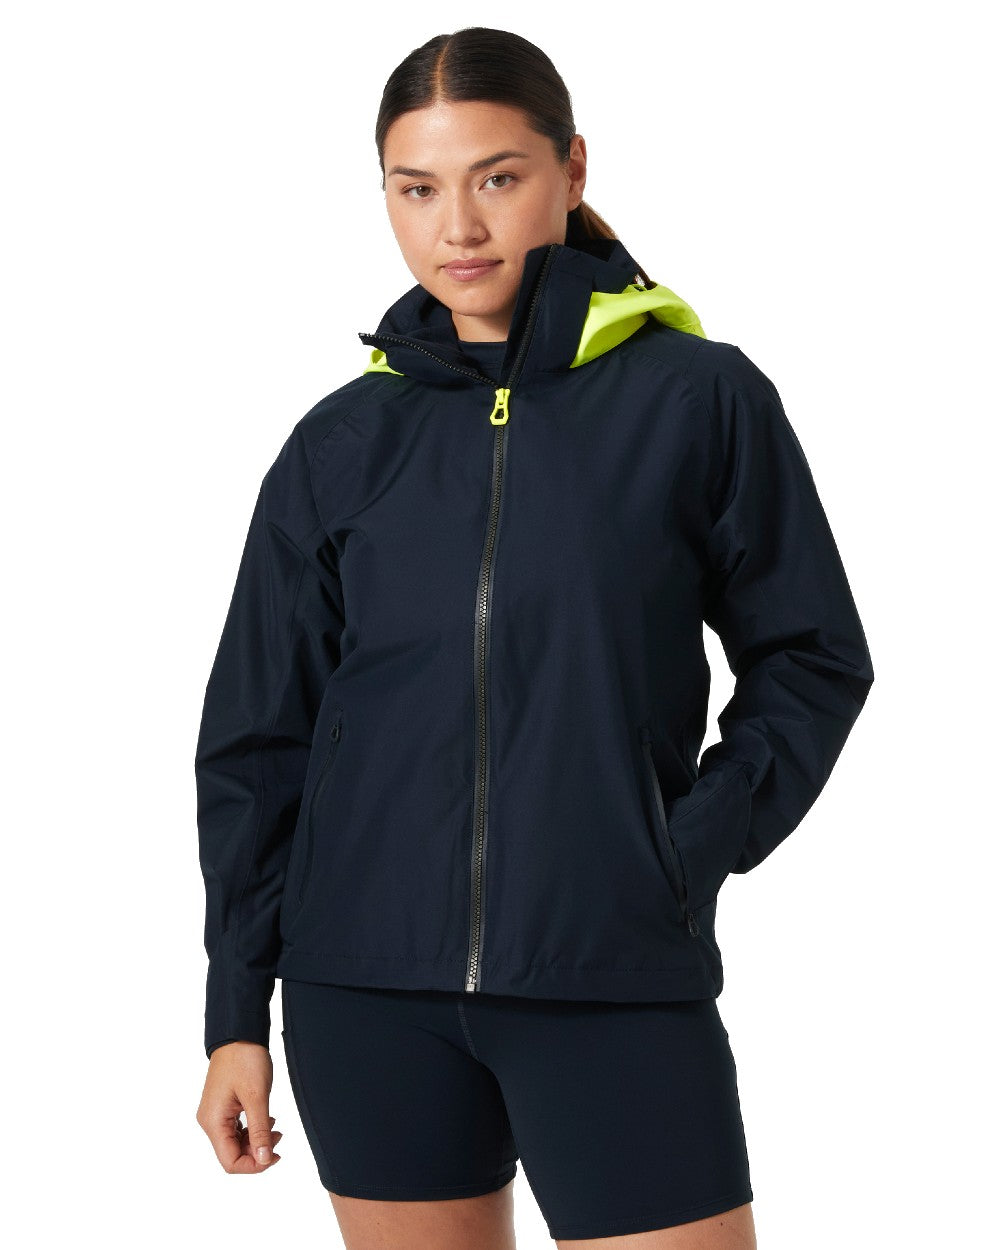 Navy coloured Helly Hansen Womens HP Foil Match Sailing Jacket 2.0 on white background 